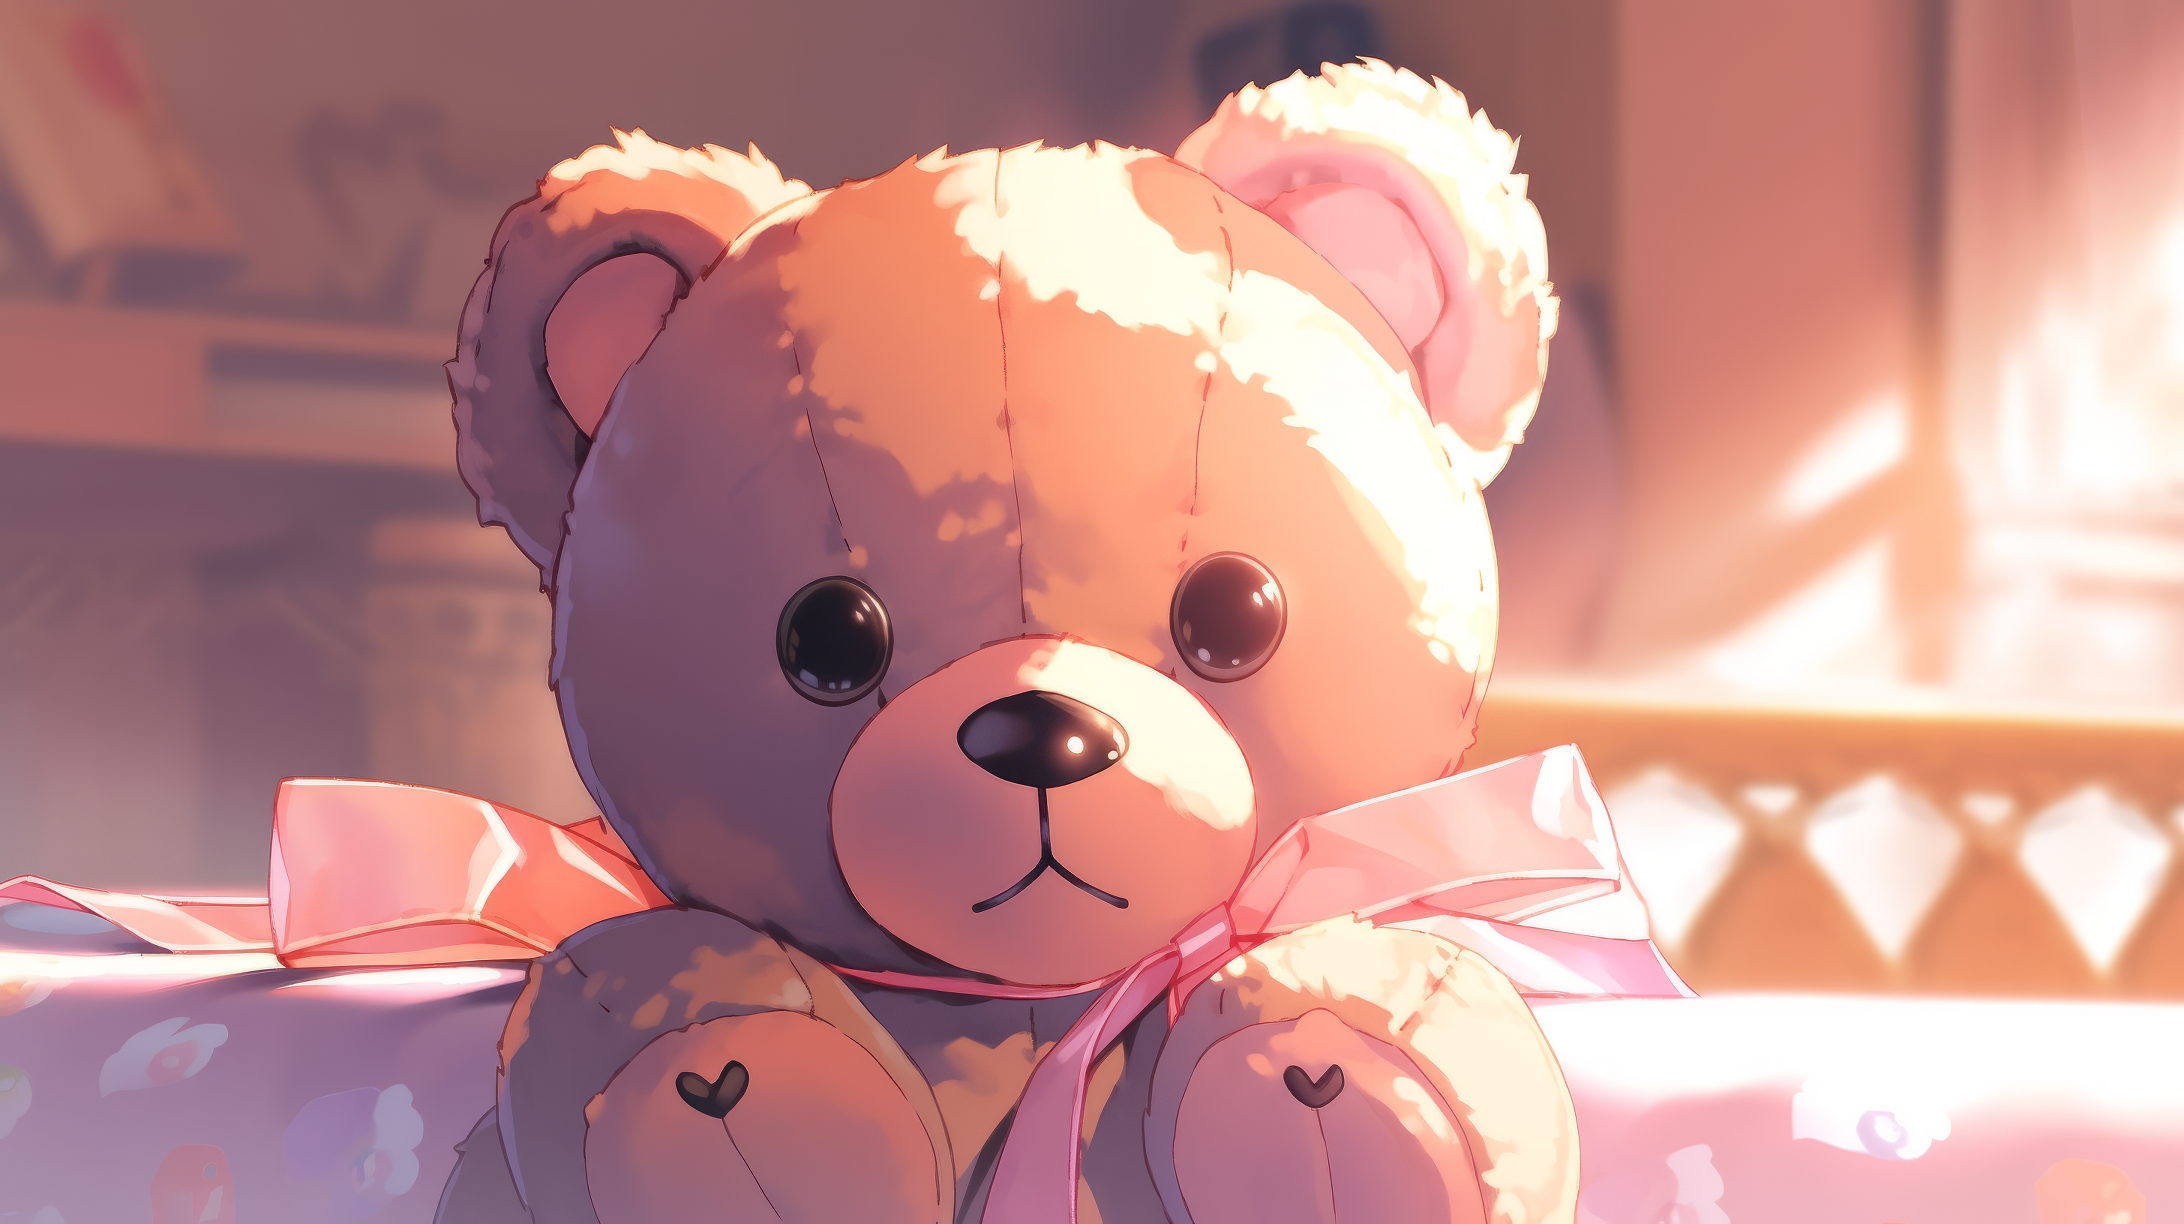 HD wallpaper of a cute teddy bear stuffed animal with a pink bow, ideal for desktop background.